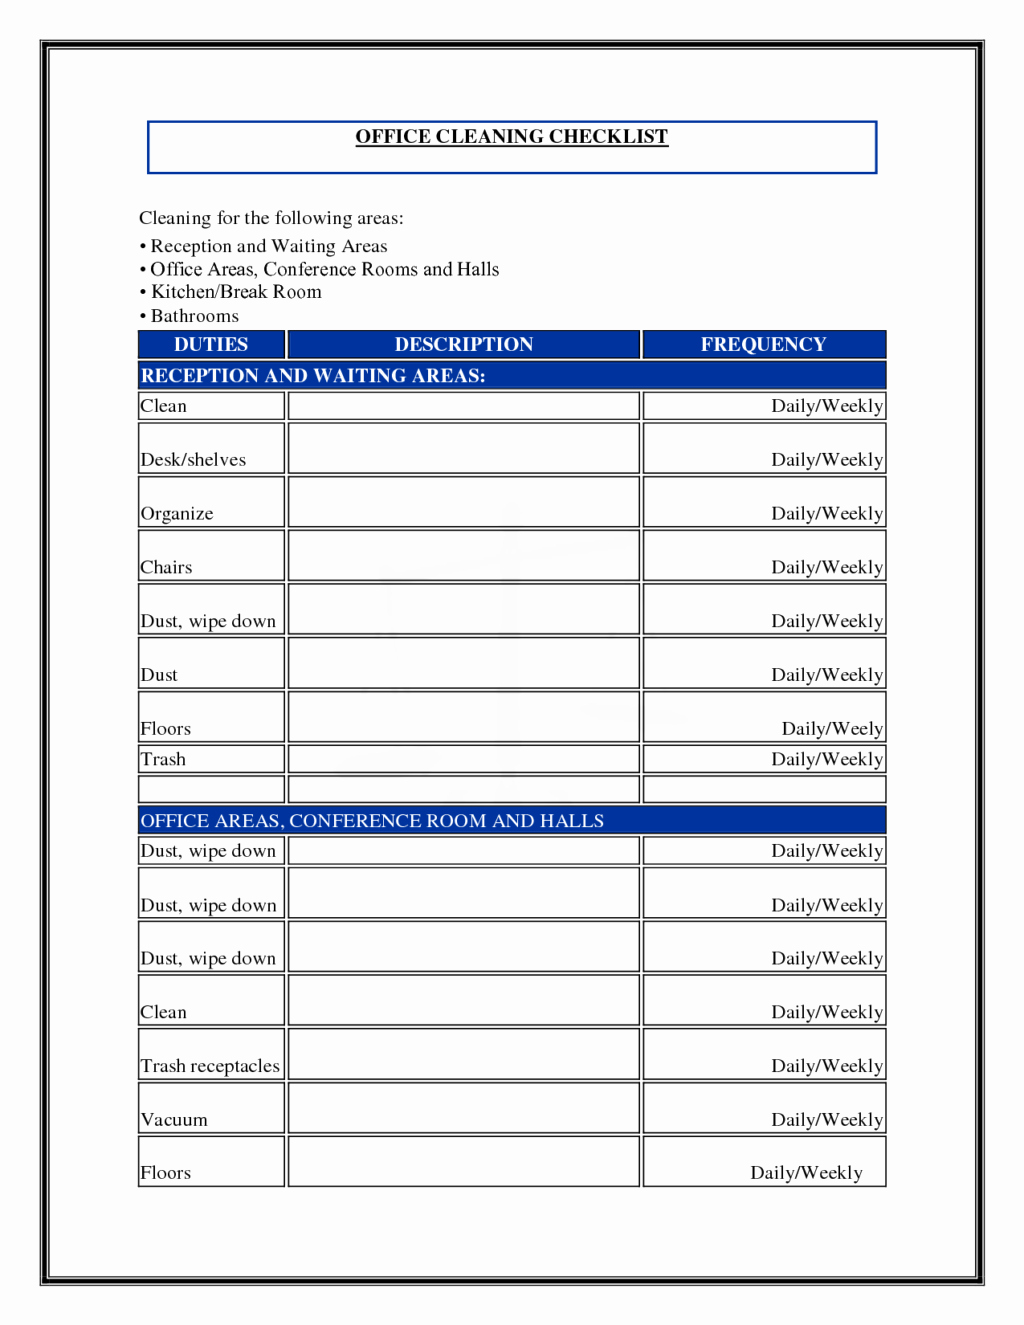 Cleaning Business Checklist Template Lovely Daily Fice Cleaning Checklist and Schedule Template